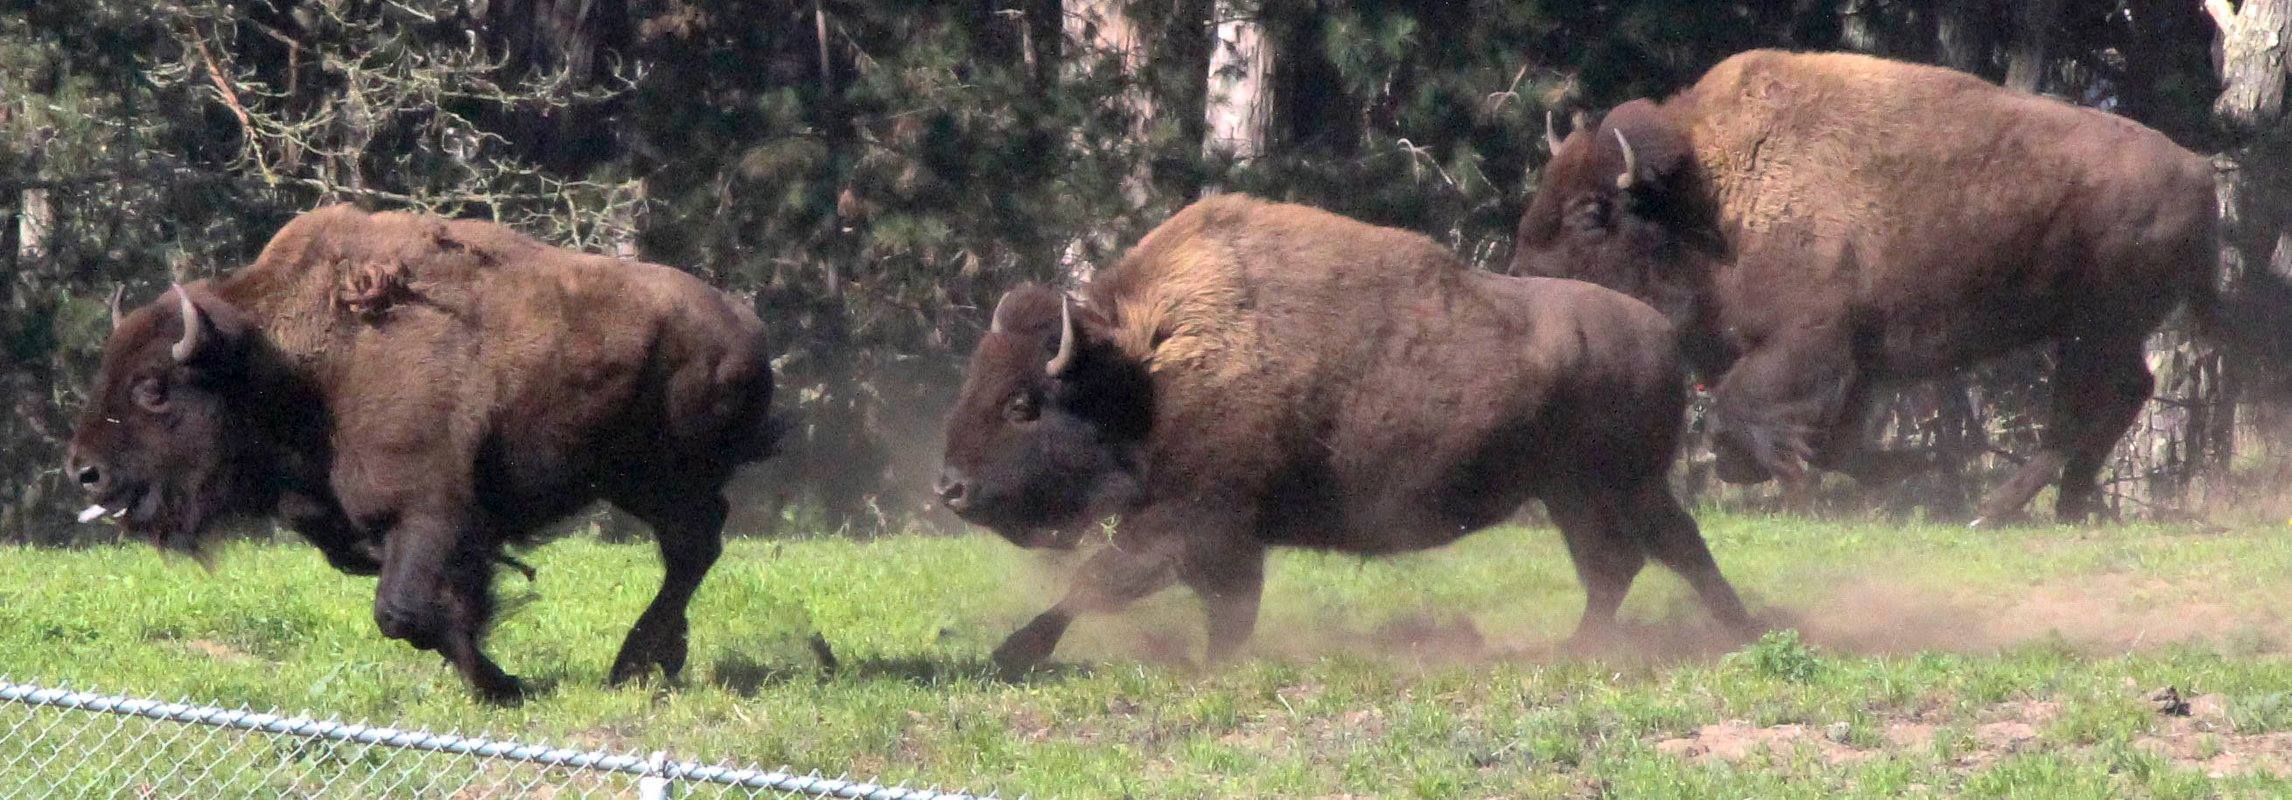 The bison in Golden Gate Park galloped through their paddock as marchers passed by. Photo by Randy Wiederhold.